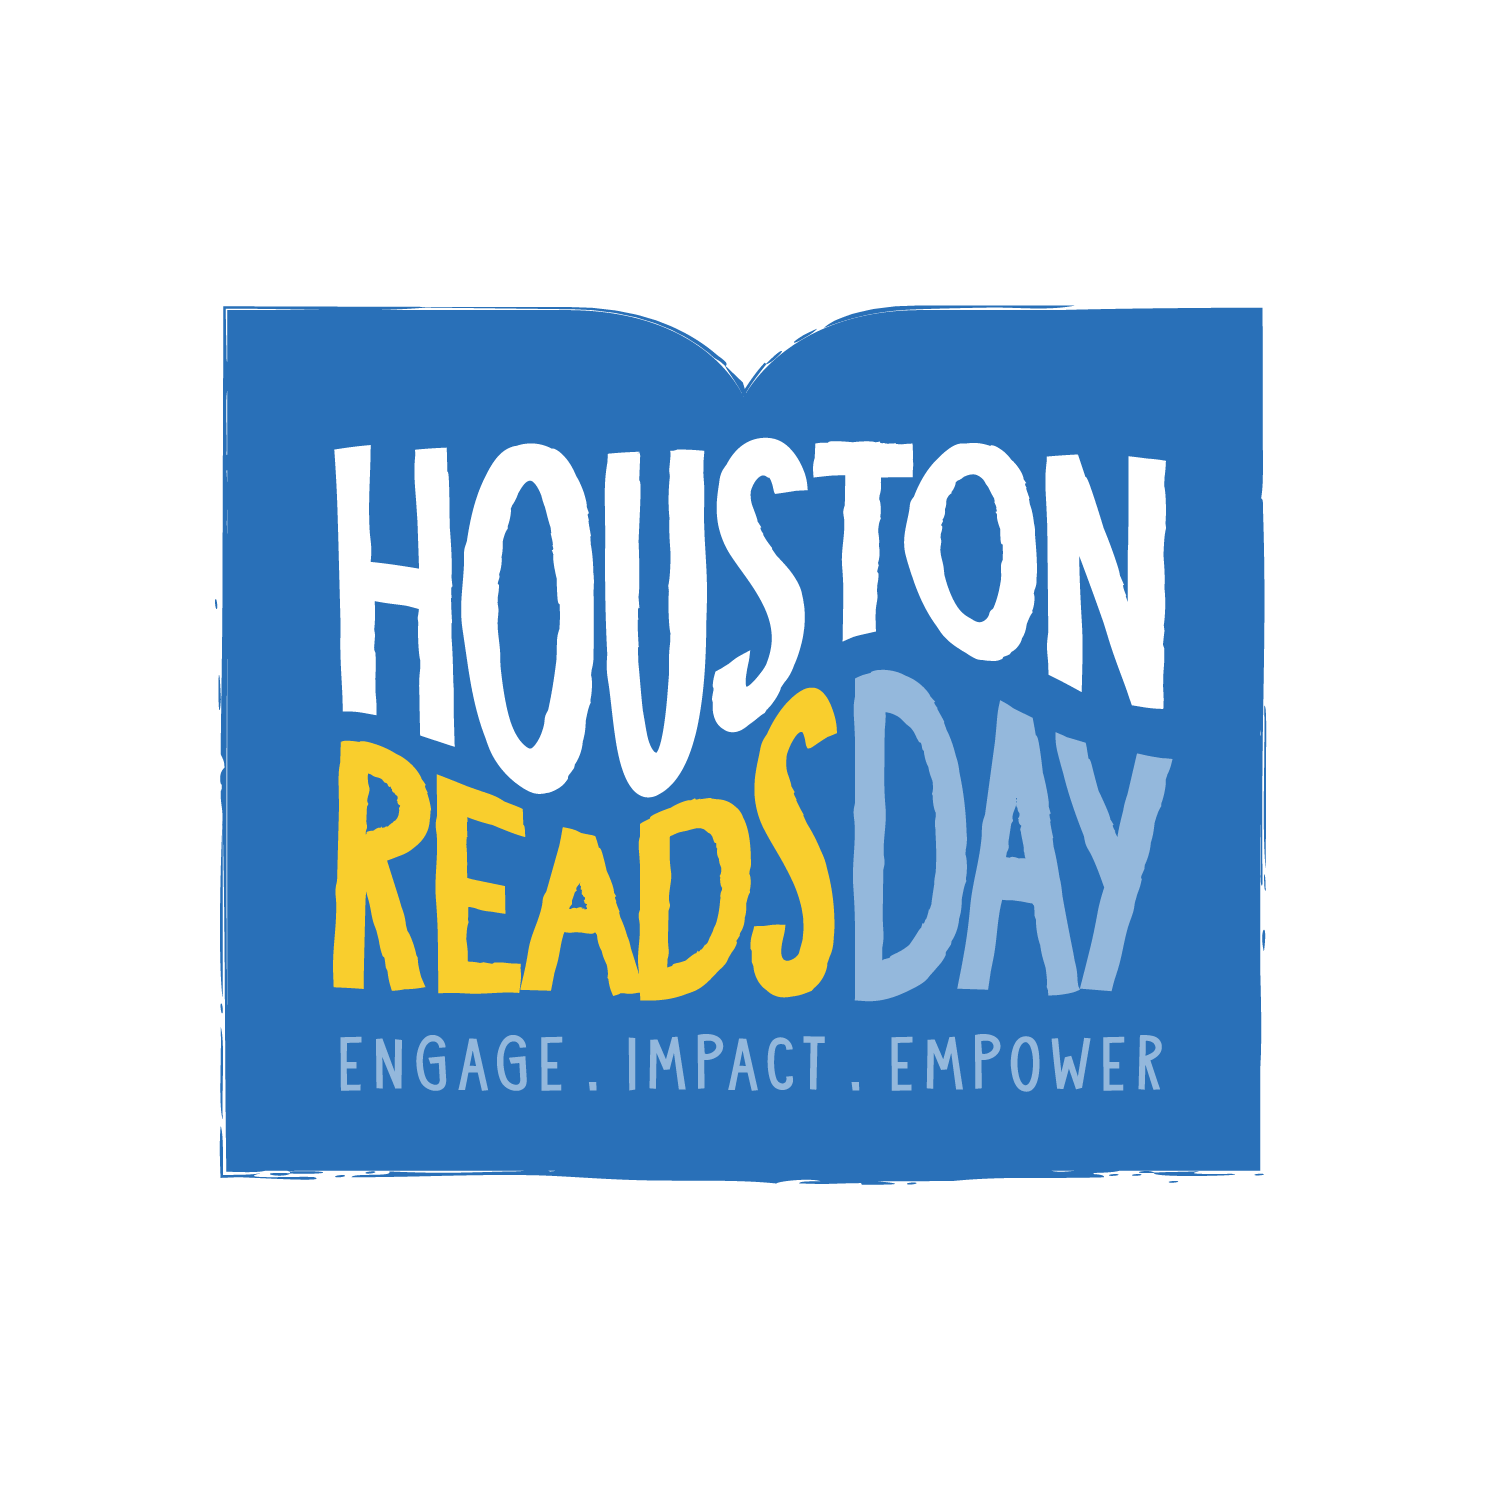 Houston Reads Day Included in Houstonia Magazine image